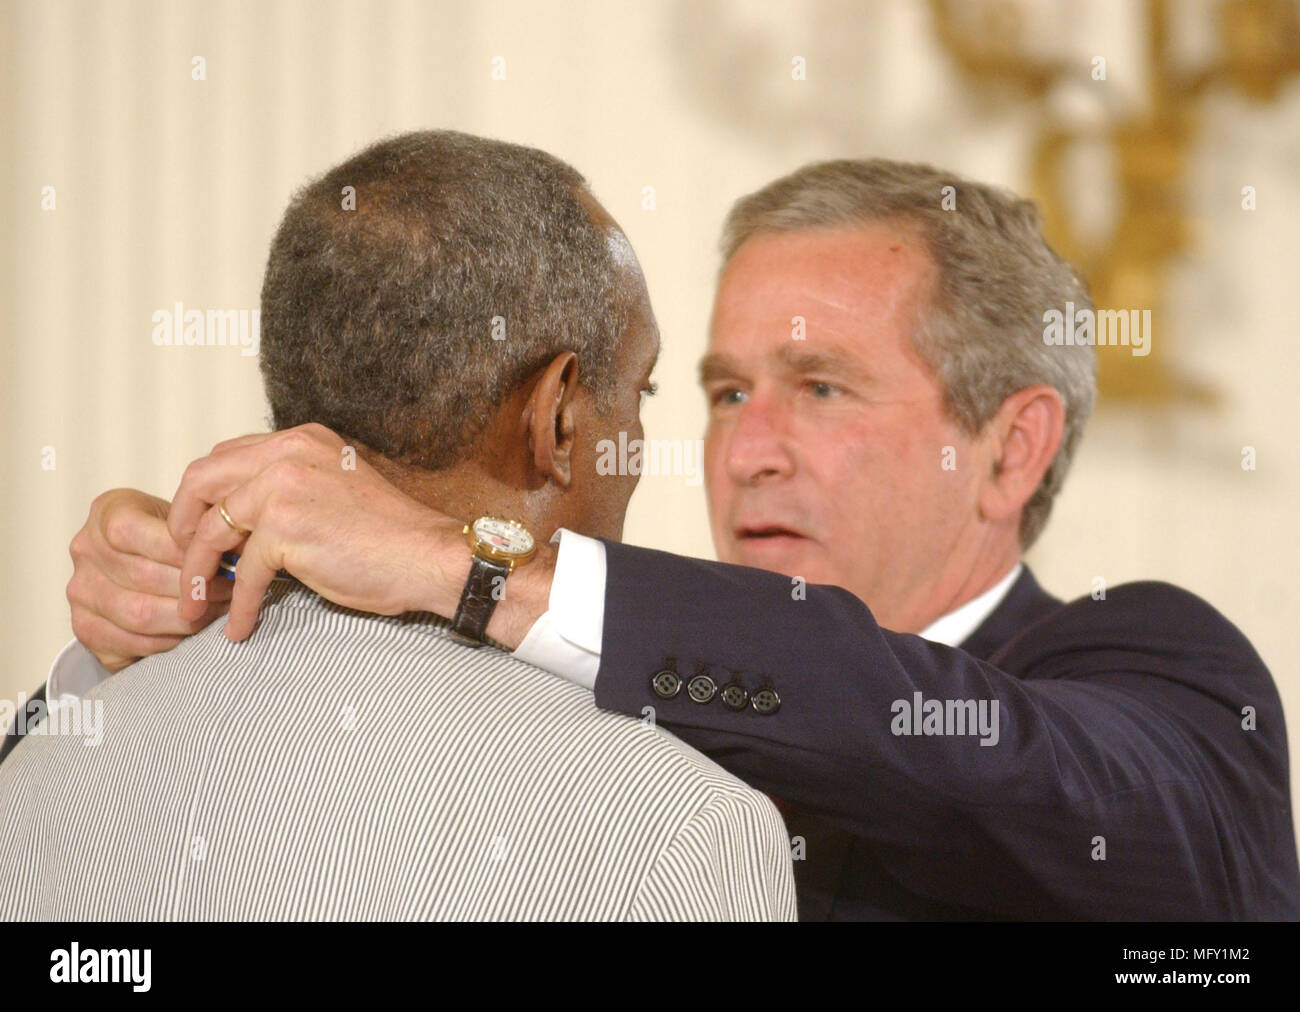 FILED - Washington, DC - July 9, 2002 -- United States President George W. Bush honors Bill Cosby with the Presidential Medal of Freedom during a ceremony in the East Room of the White House in Washington, DC on July 9, 2002.Credit: Ron Sachs/CNP - NO WIRE SERVICE · Photo: Ron Sachs/Consolidated News Photos/Ron Sachs/CNP Stock Photo